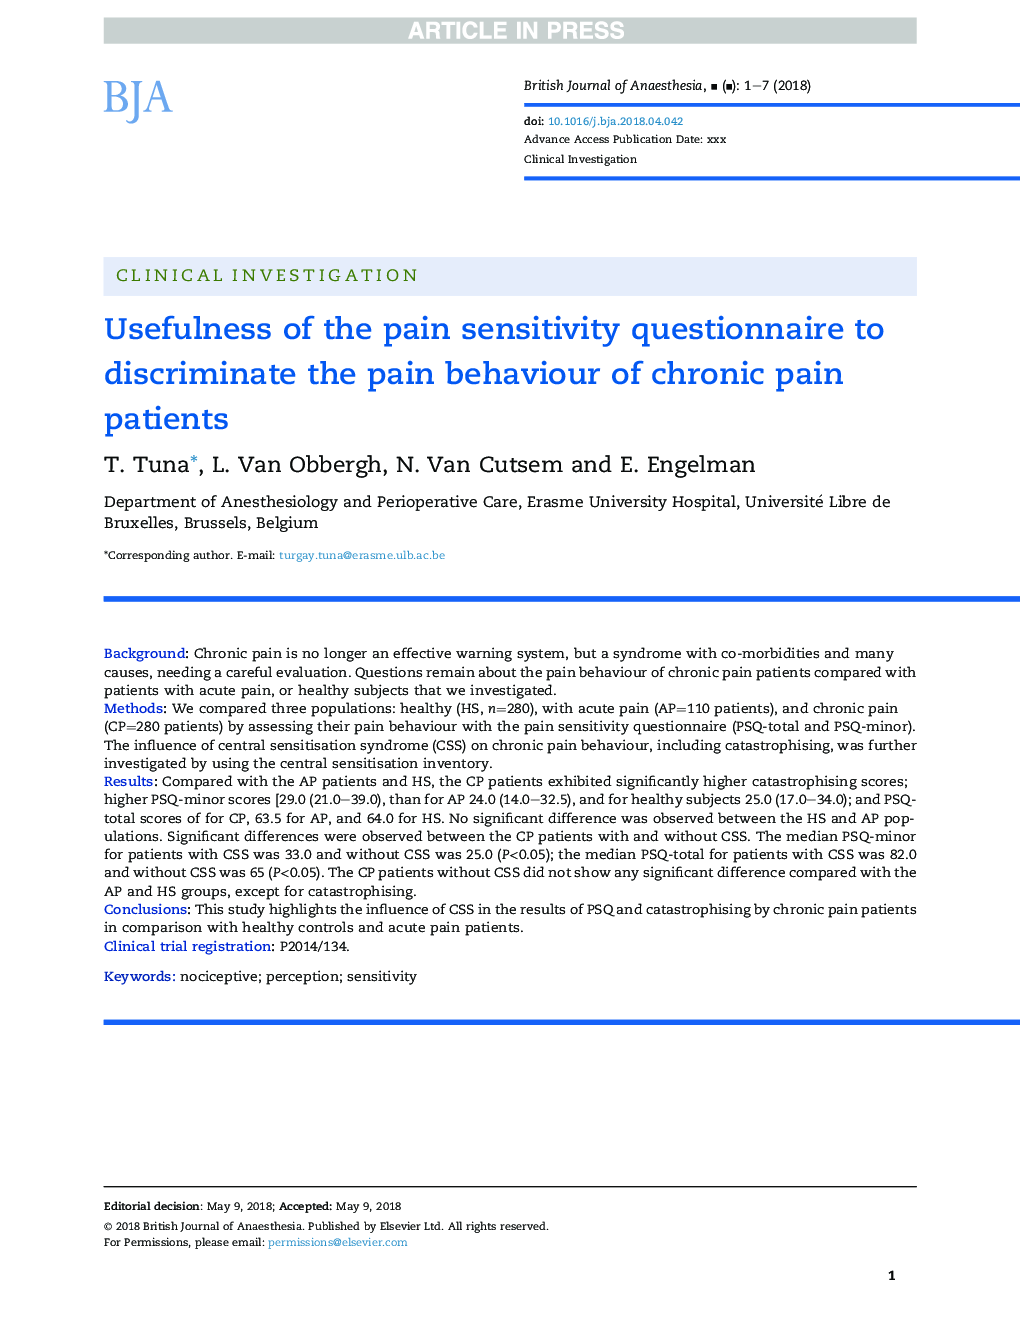 Usefulness of the pain sensitivity questionnaire to discriminate the pain behaviour of chronic pain patients